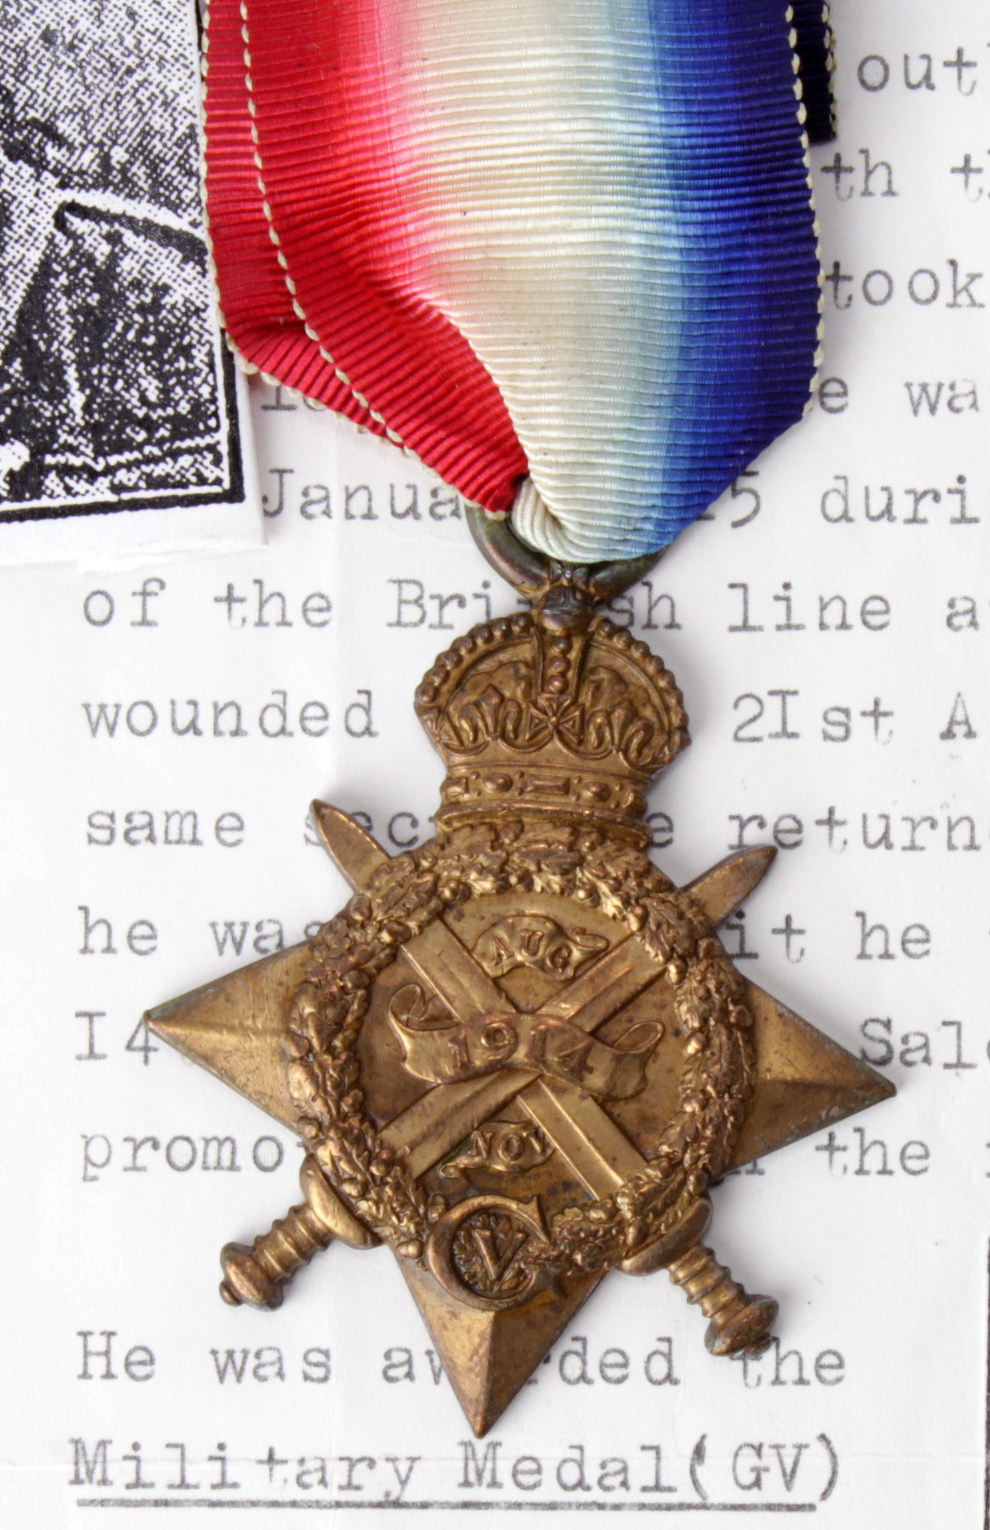 1914 Star named 10731 Pte J Bramwell 1/L'pool Regt. Awarded the Military Medal. To France 12.8.14.